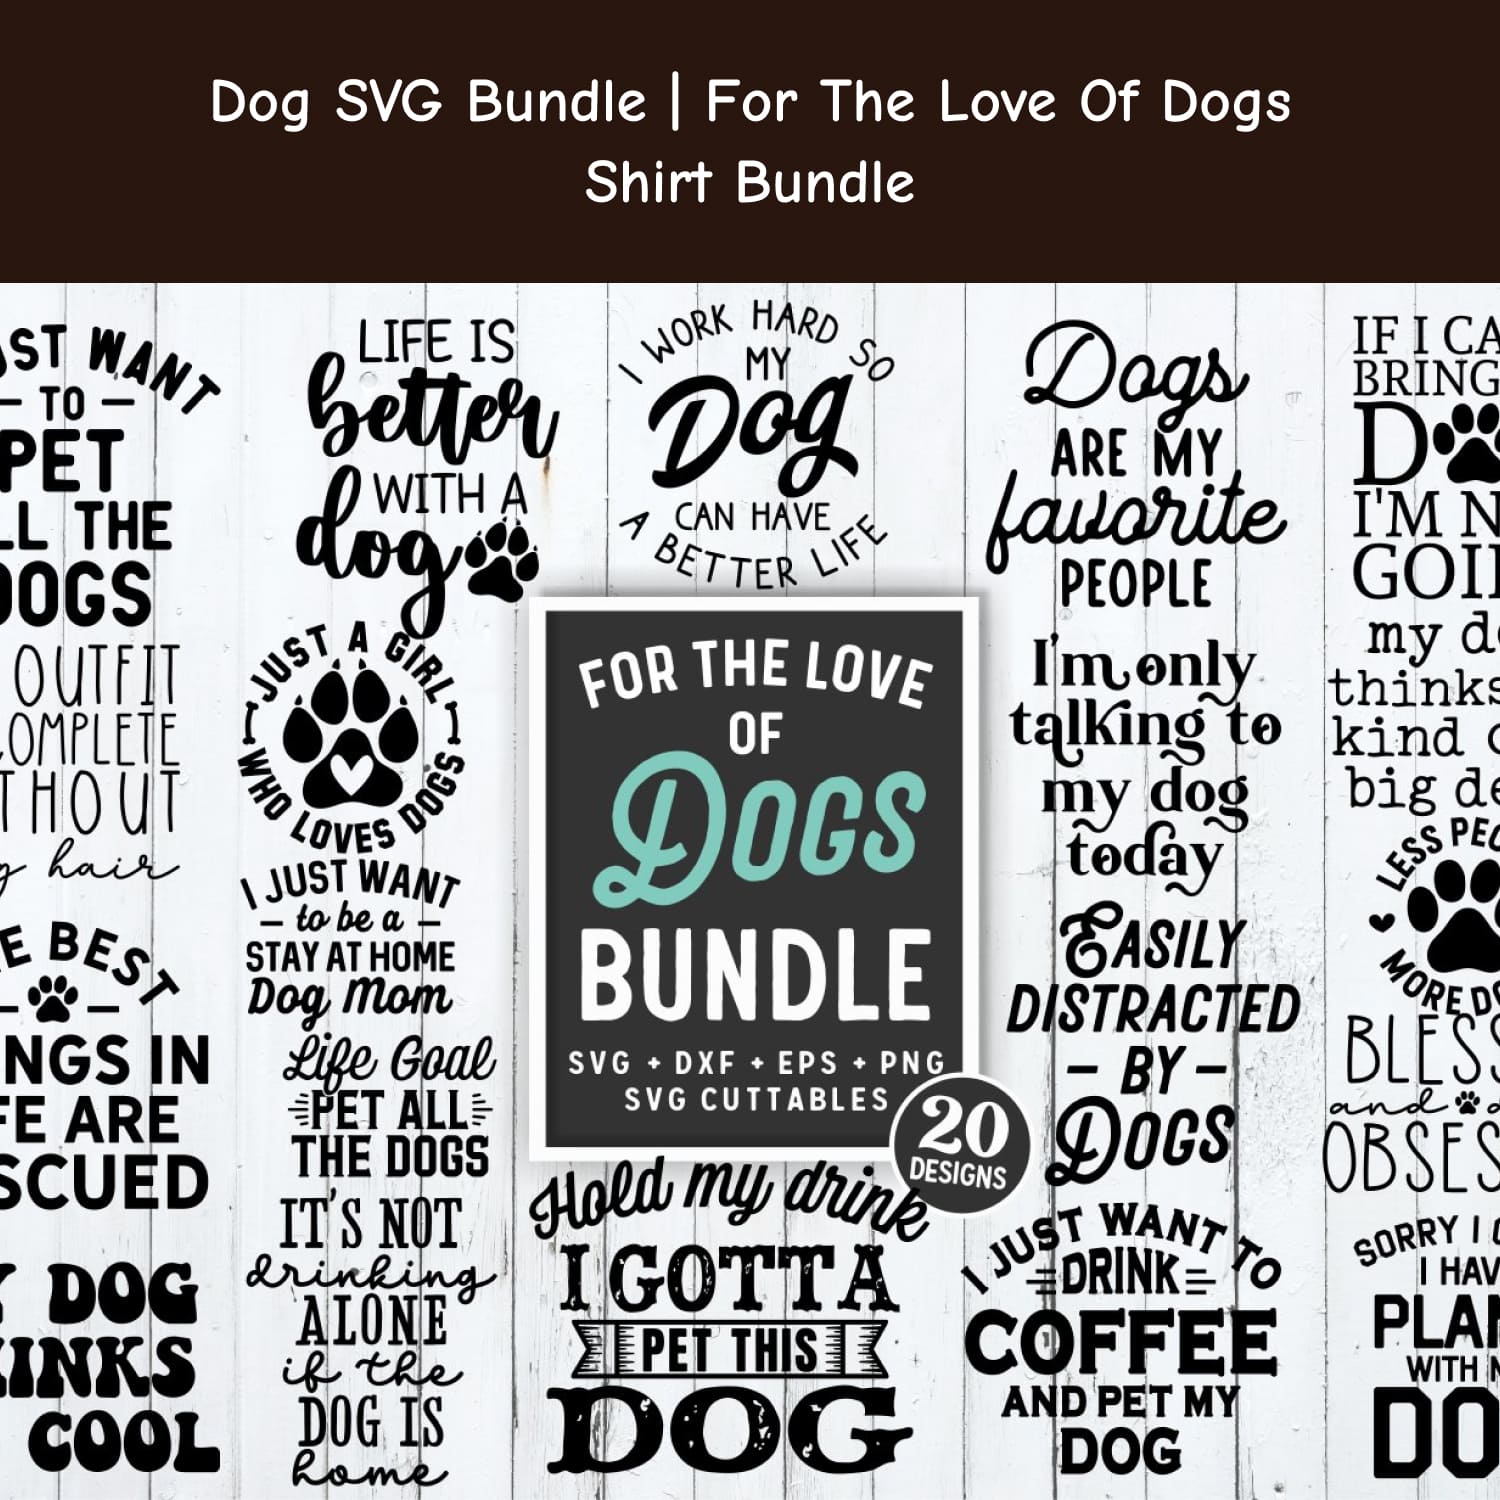 Dog svg bundle for the love of dogs.